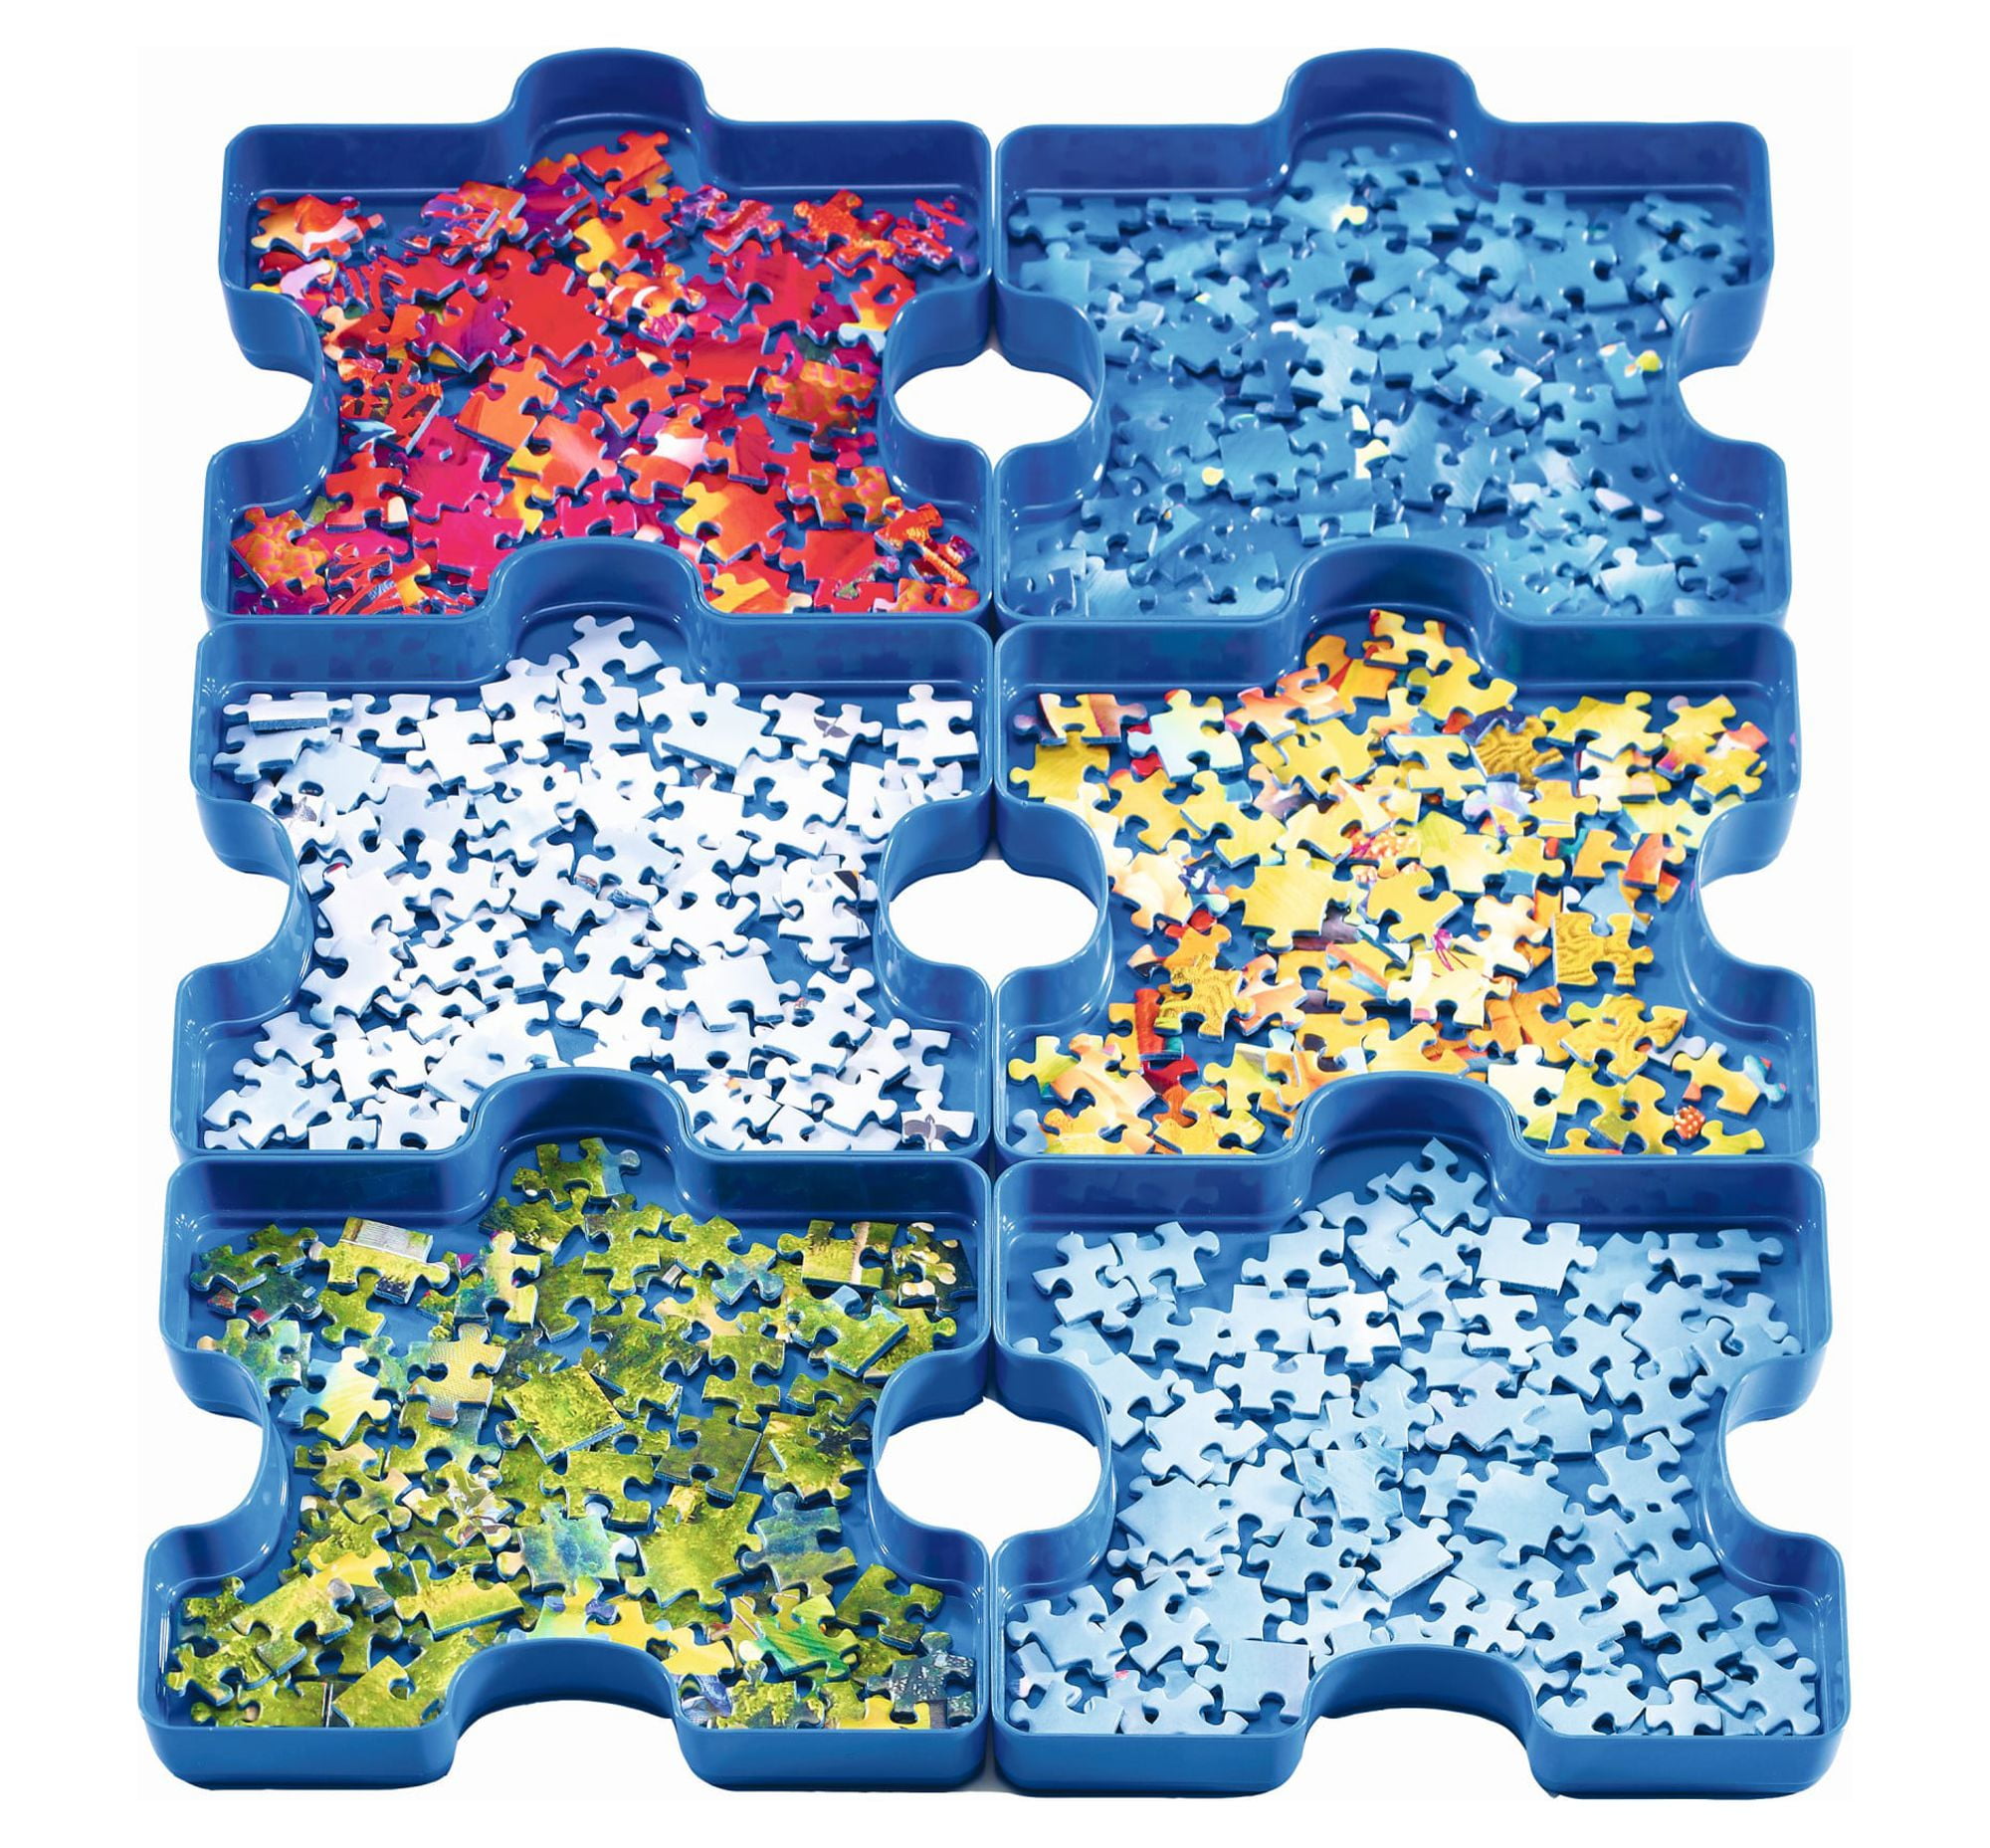 REVIEW Ravensburger Sort & Go Jigsaw Puzzle Sorting Trays FOR PIECES I LOVE  THEM 